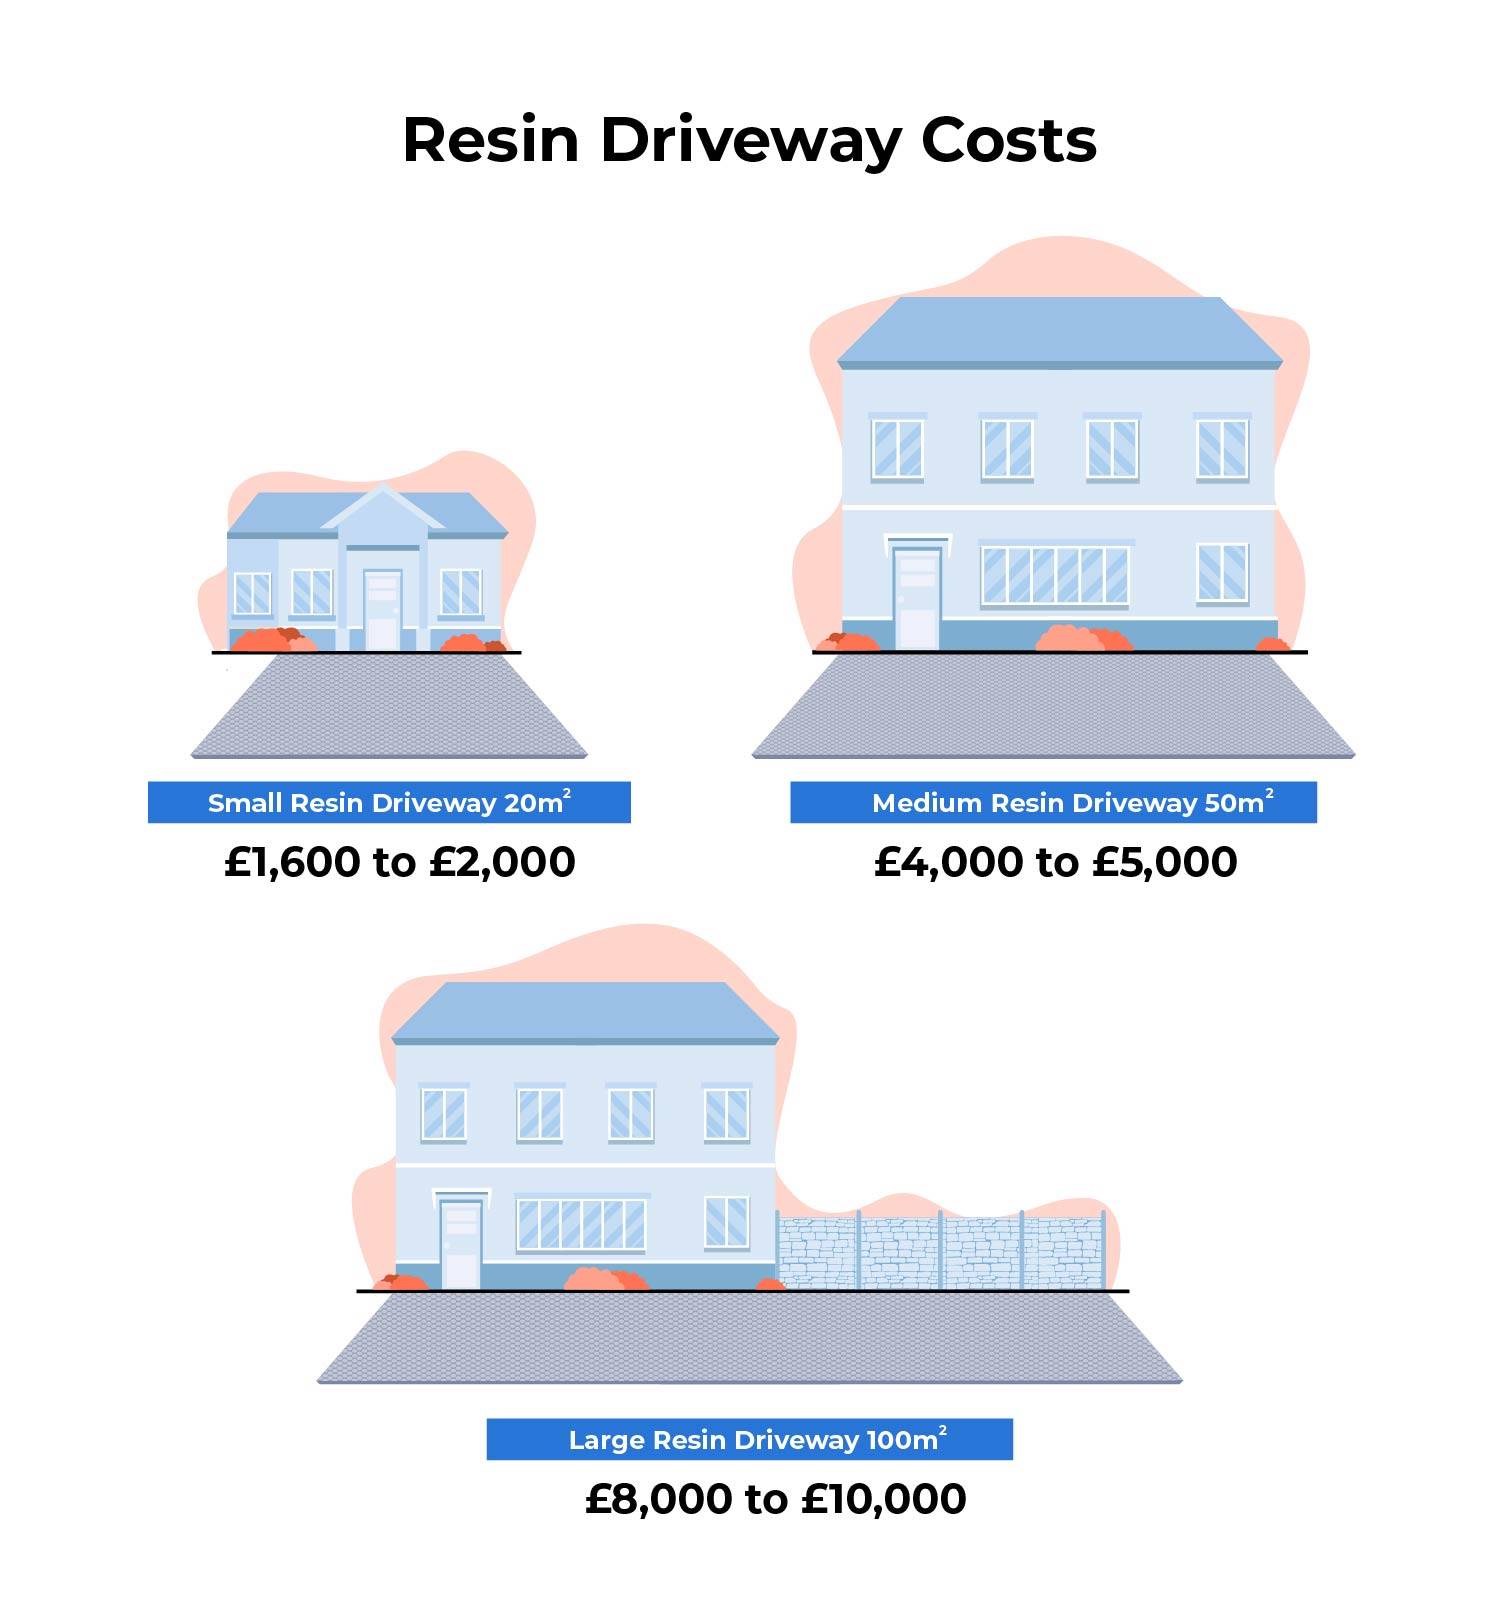 resin driveway sizes and costs graphic